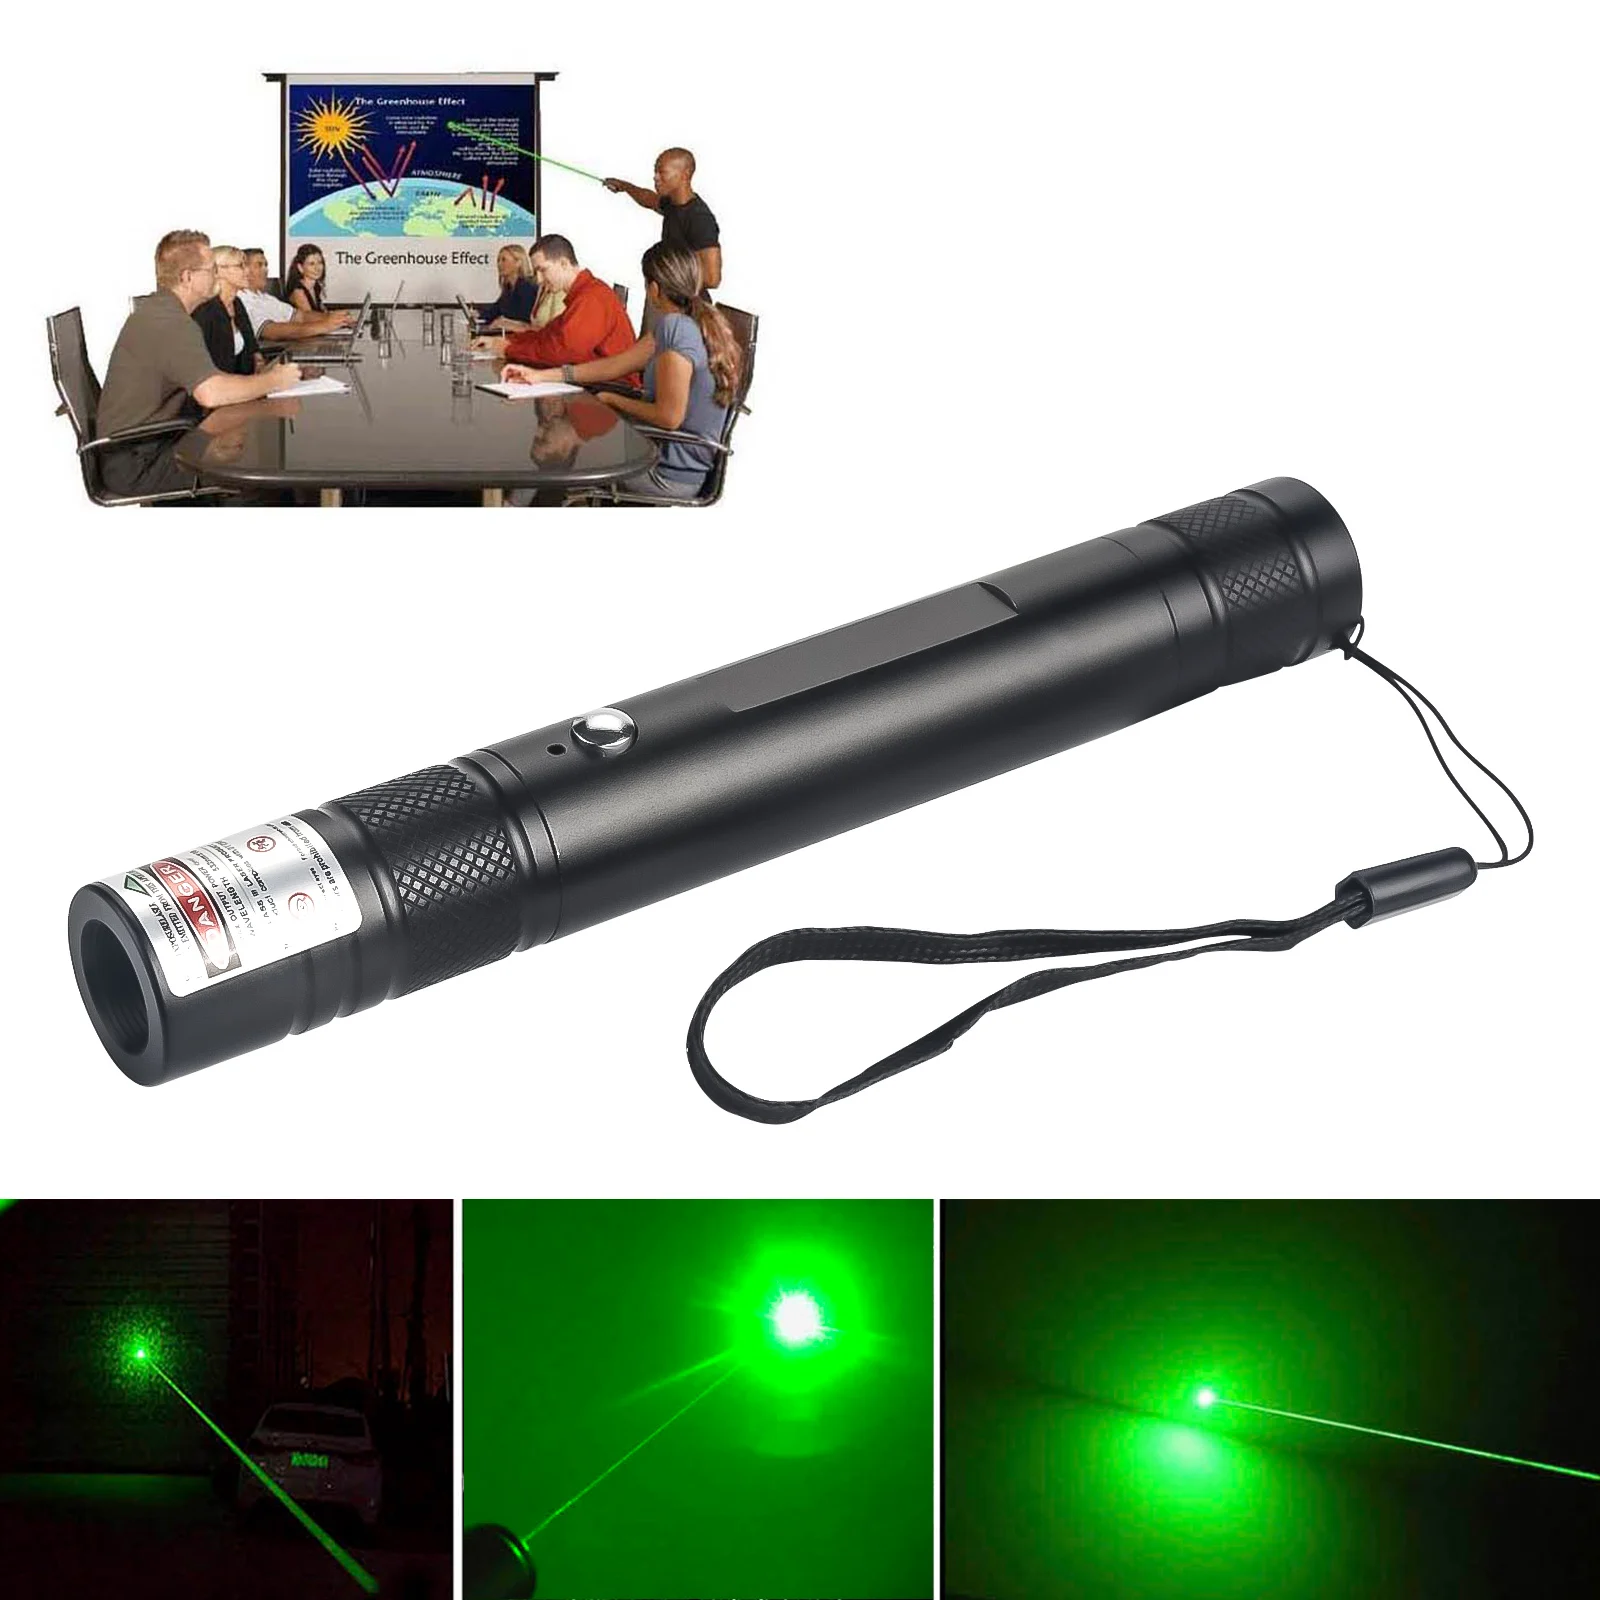 Powerful 50mw Aluminum Rechargeable Torch Long Distance Astronomy 532nm Green 303 LED Laser Pointer For Pointer Sky Star Hunting